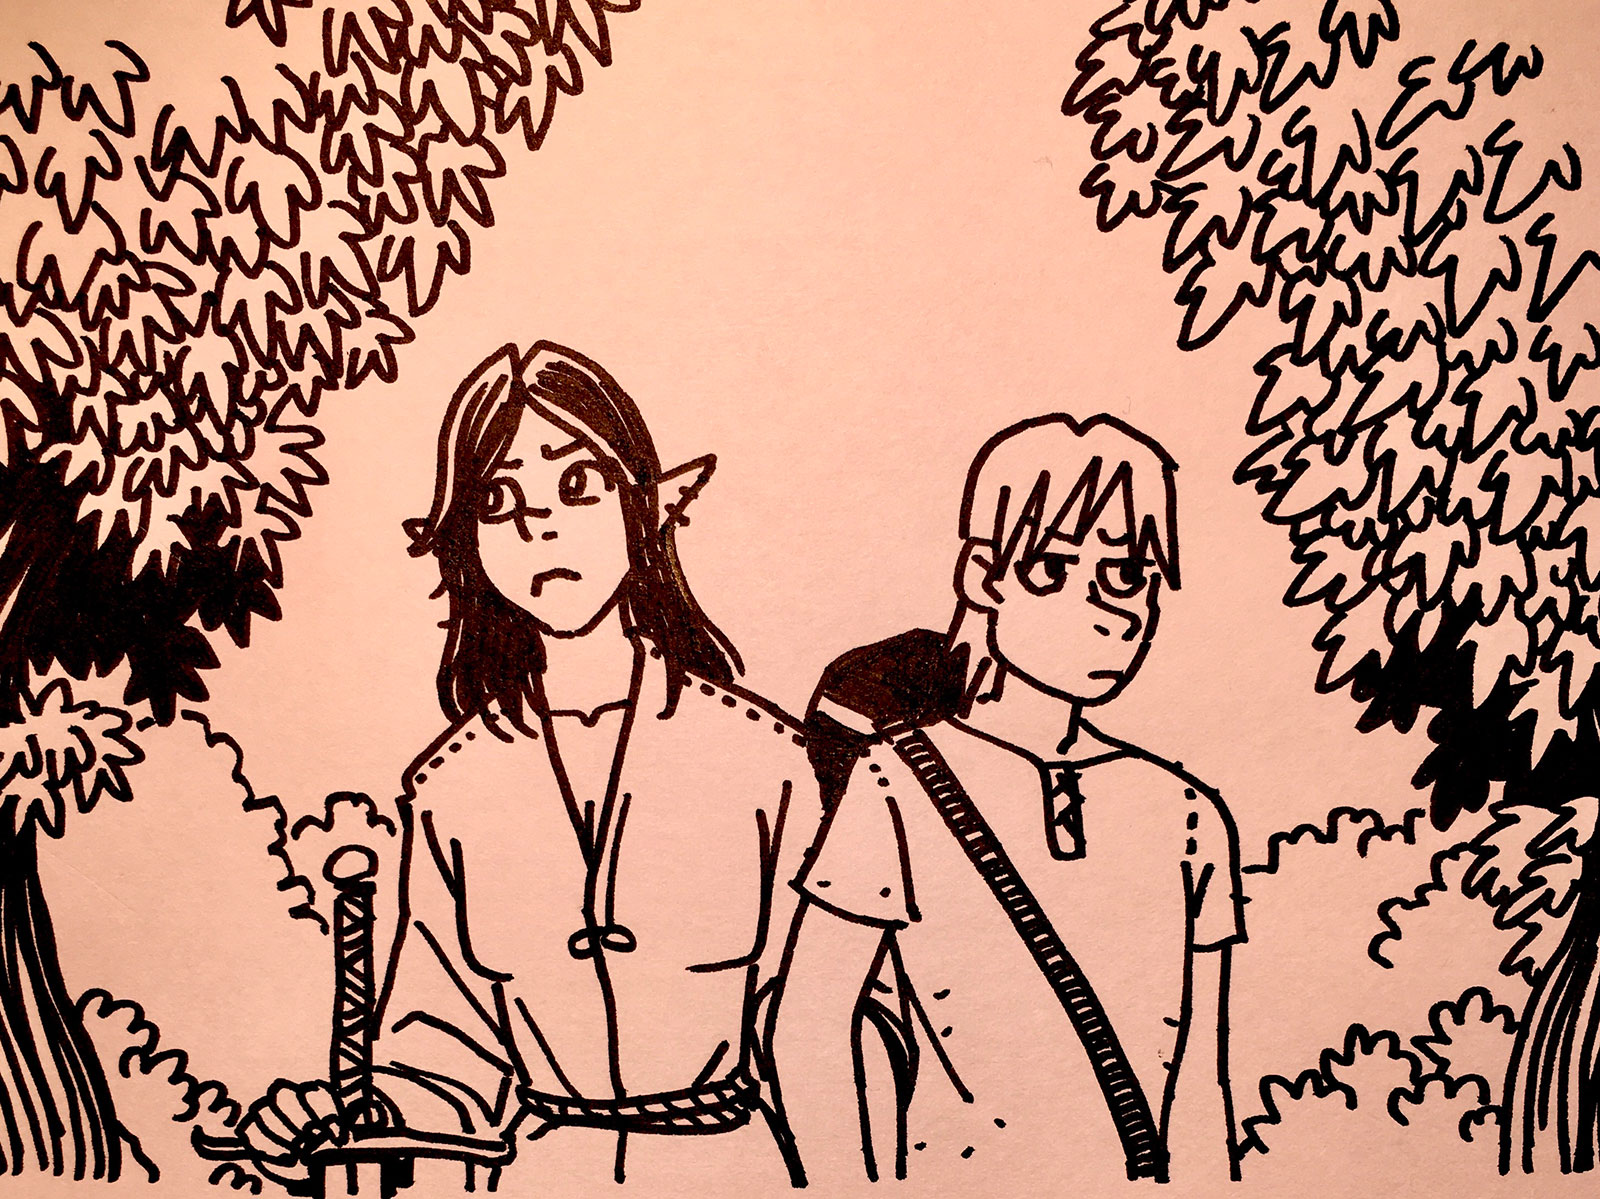 Oxengli and Glin walk through the forest hand in hand, looking out for signs of trouble. Oxengli carries a battered but serviceable greatsword that she slightly knows how to use.